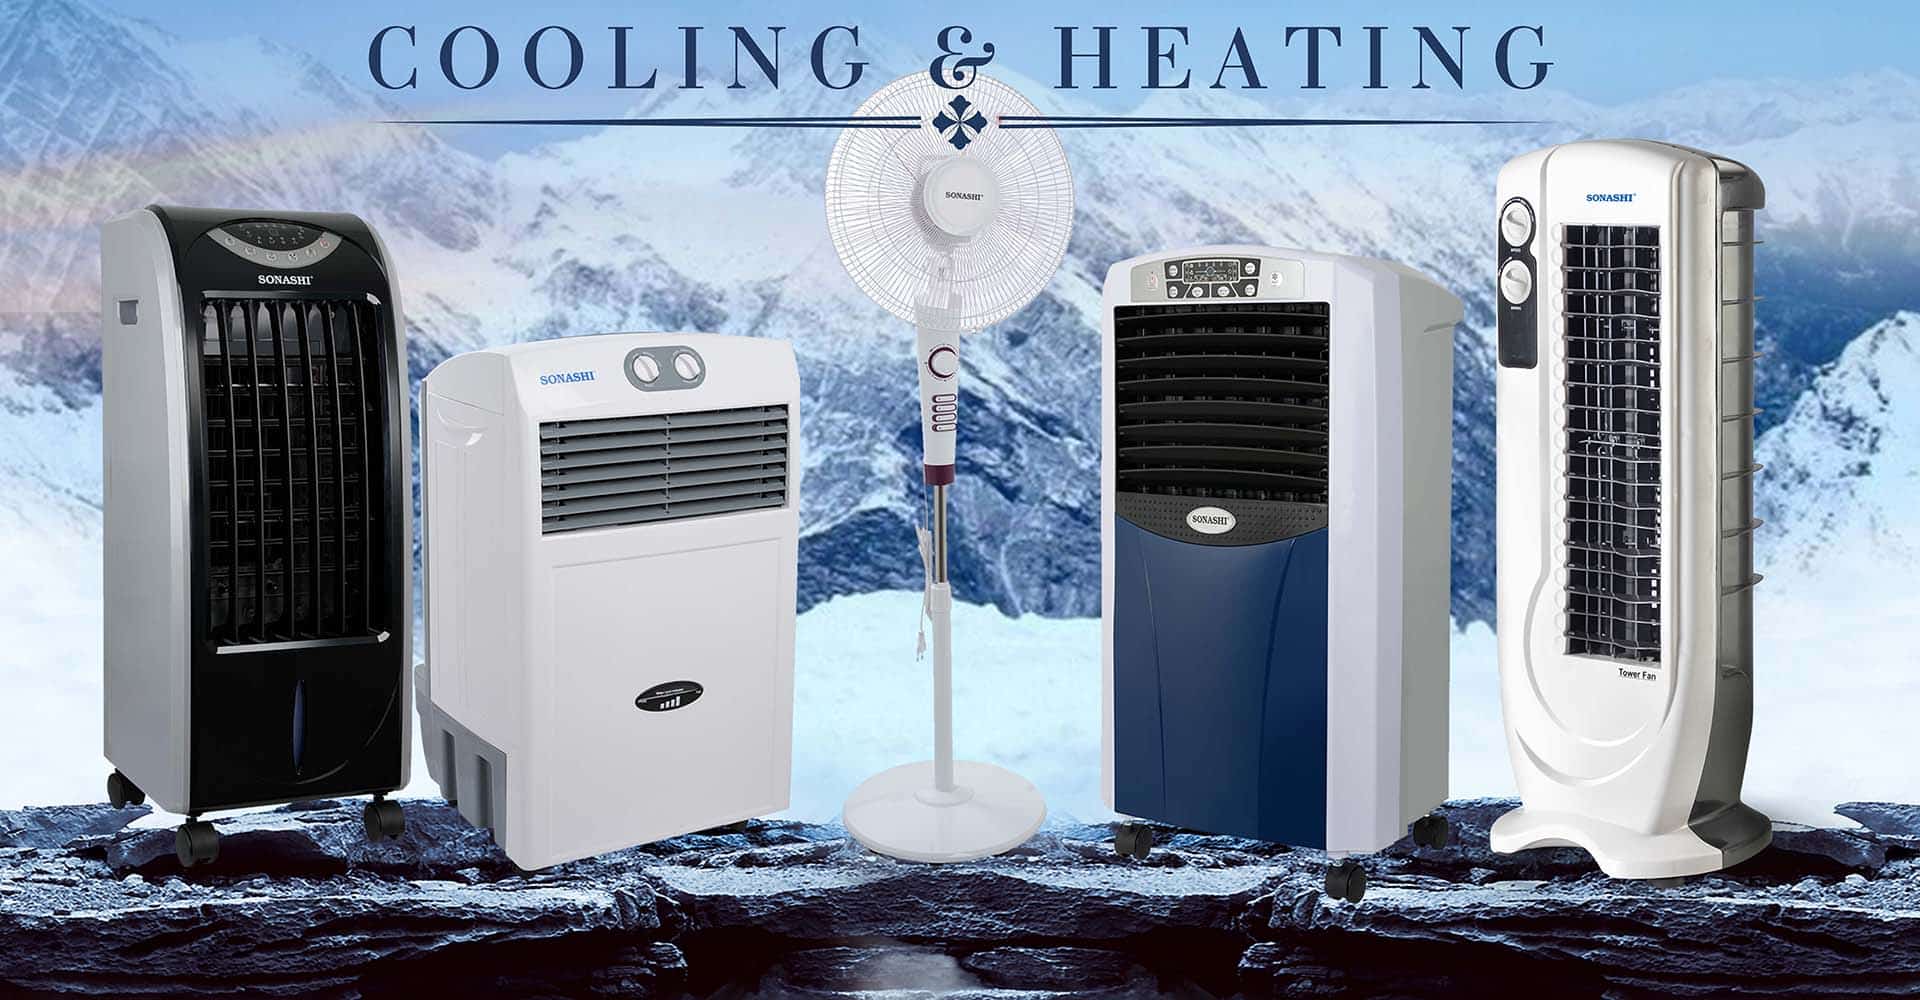 Cooling and Heating Appliances in Dubai